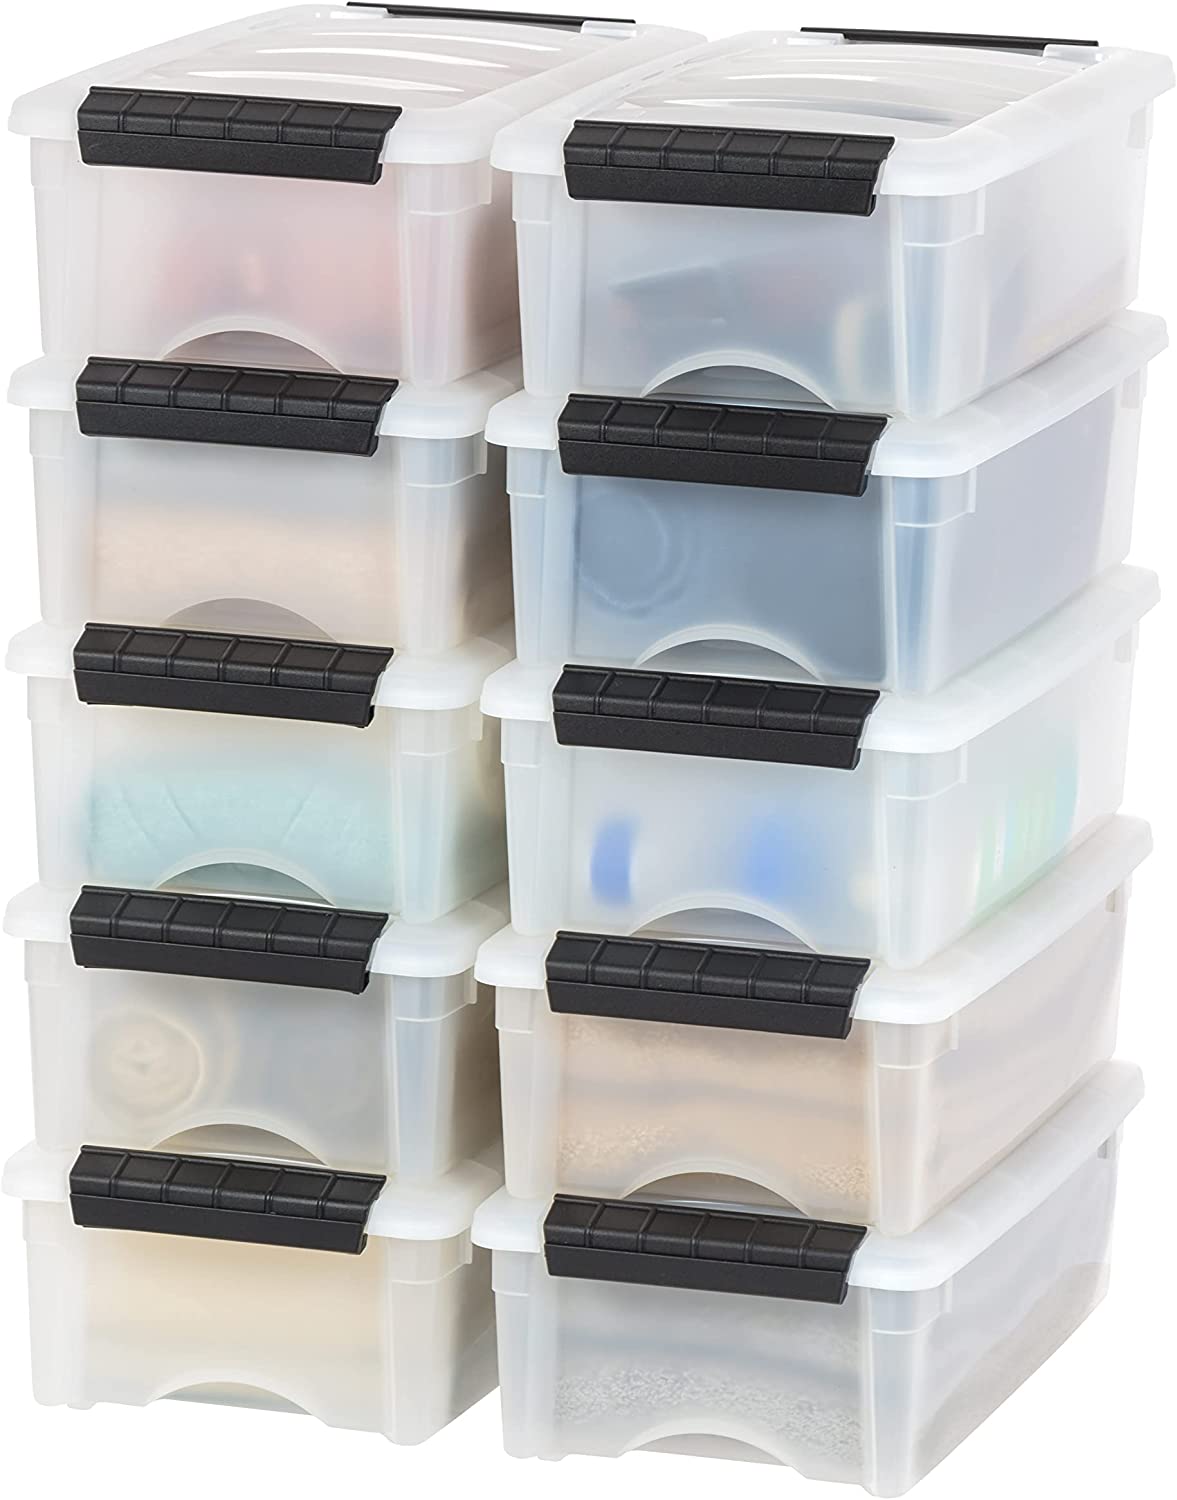 https://bigbigmart.com/wp-content/uploads/2023/06/IRIS-USA-5-Qt.-Plastic-Storage-Container-Bin-with-Secure-Lid-and-Latching-Buckles-10-pack-Pearl-Durable-Stackable-Nestable-Organizing-Tote-Tub-Box-Toy-General-Organization-Small.jpg